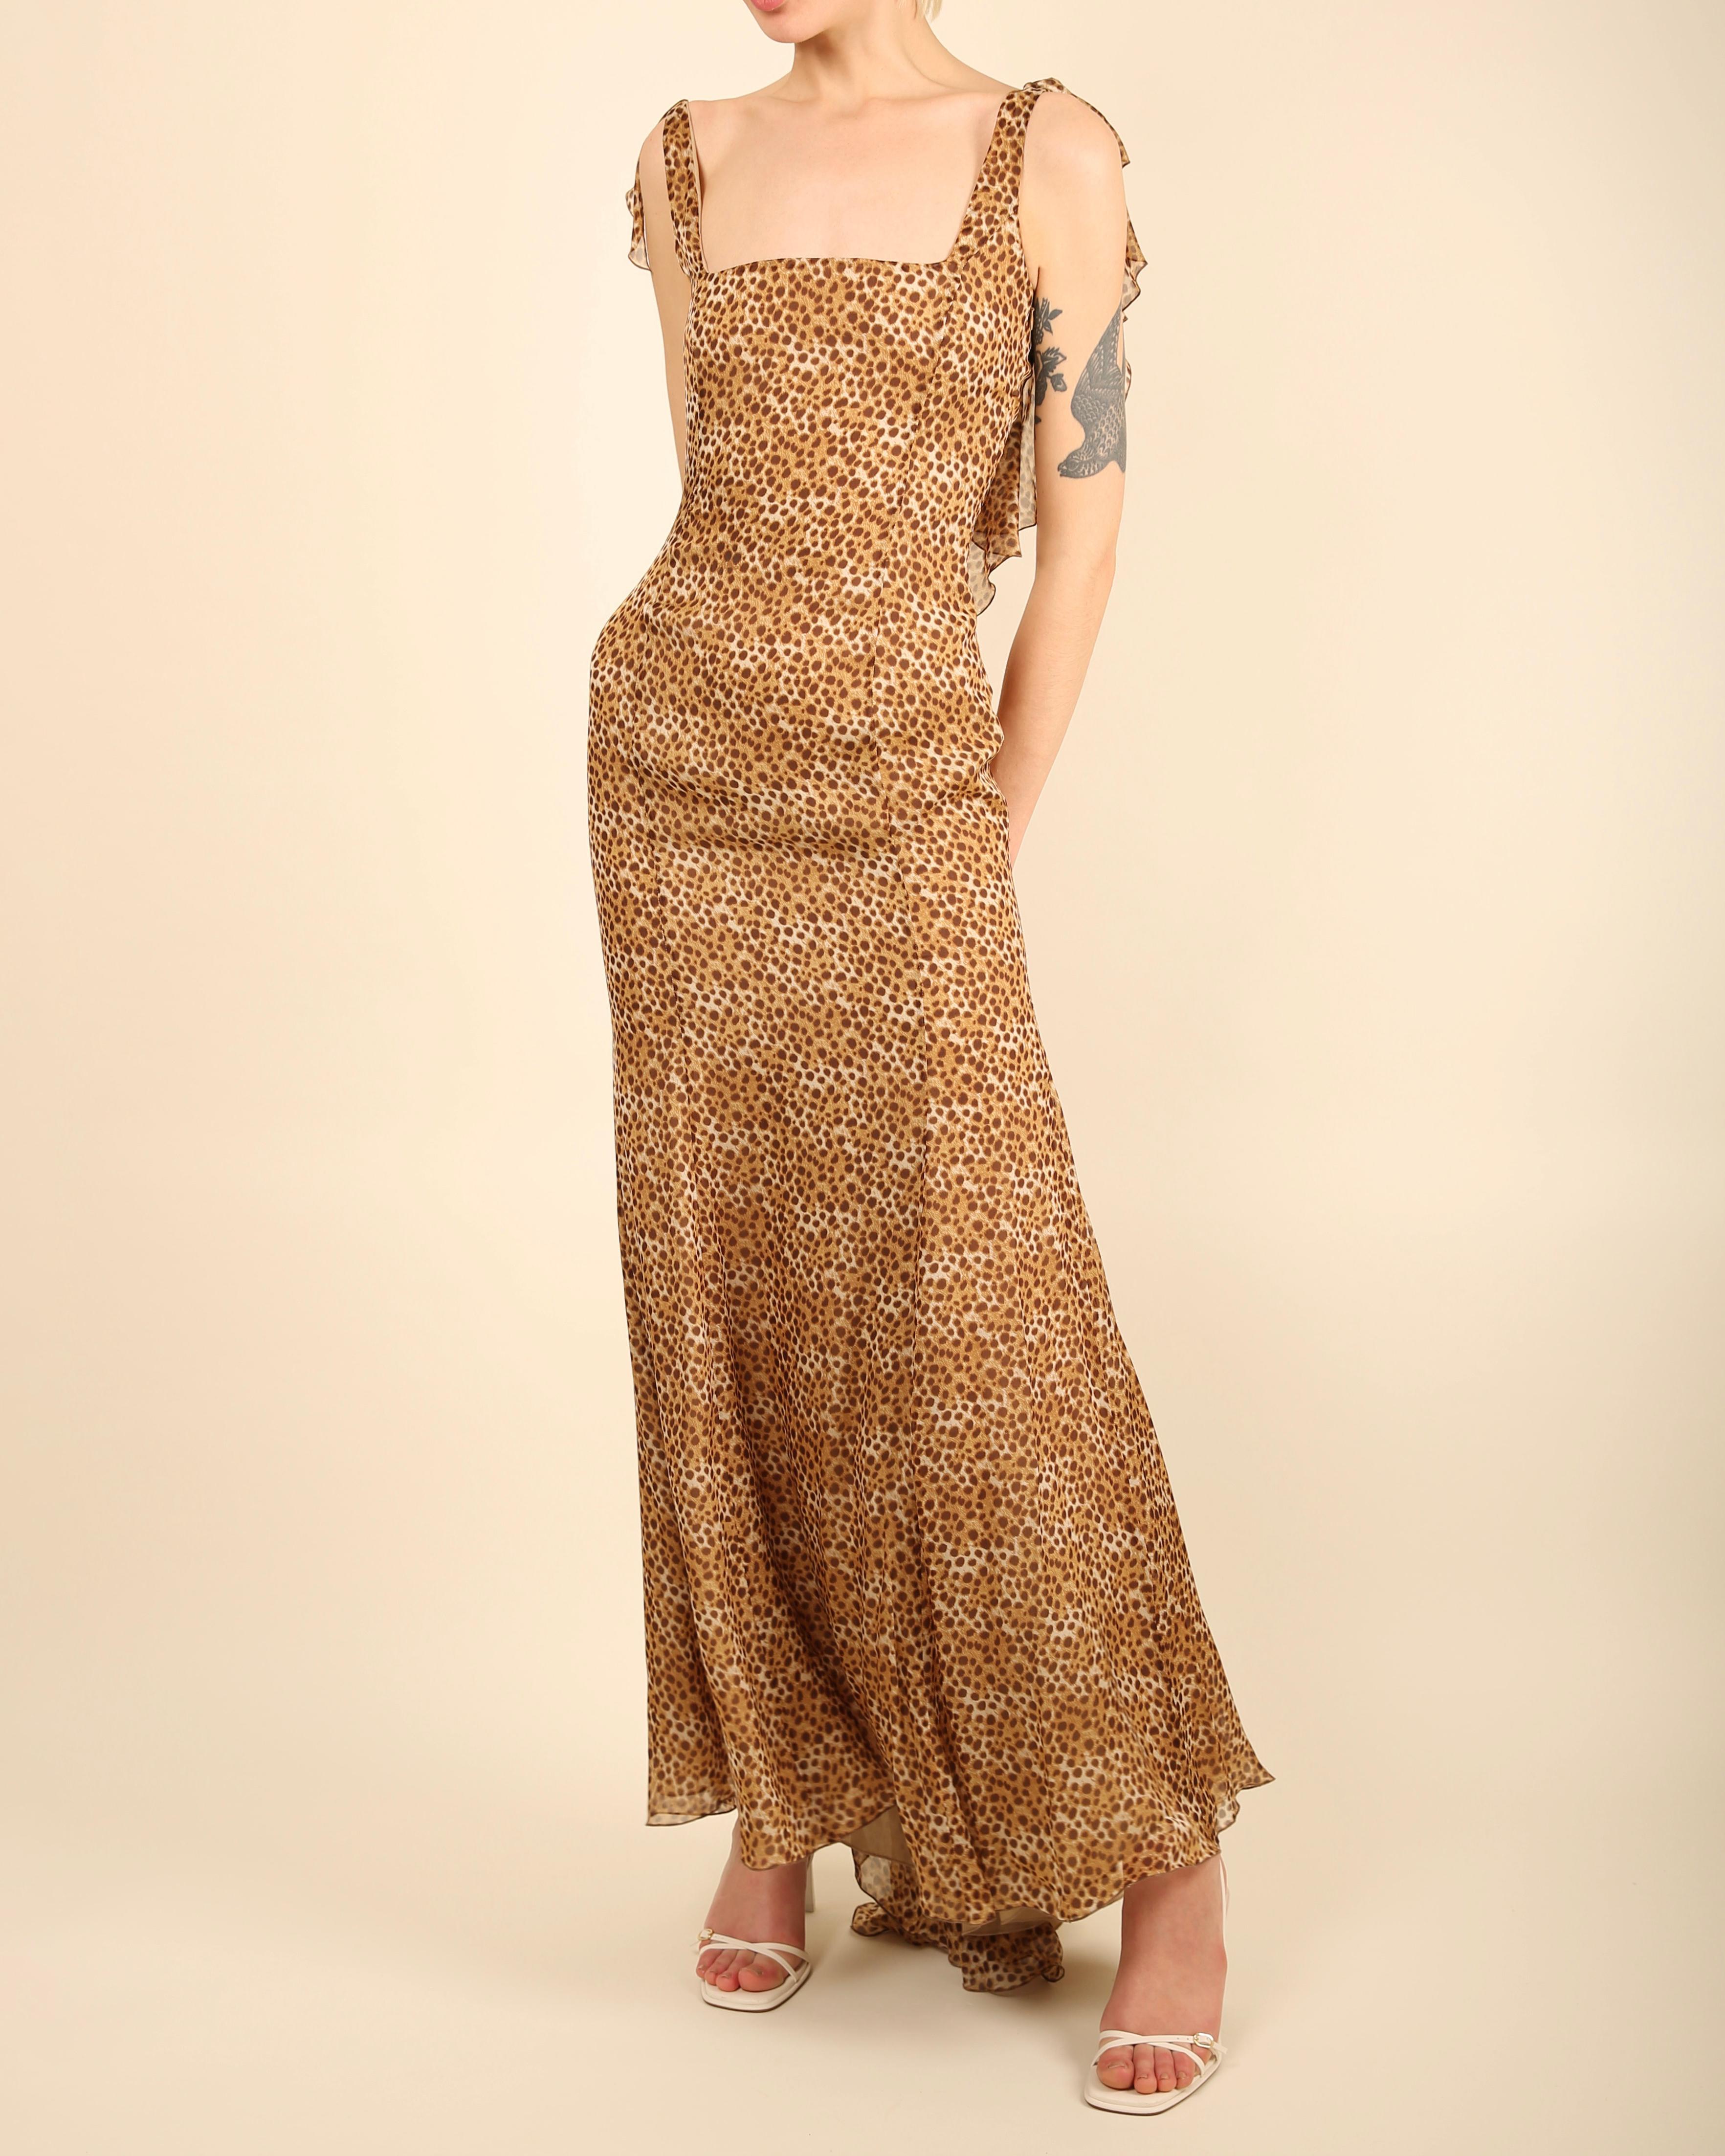 Valentino circa 1990 vintage sleeveless brown leopard print backless dress gown 2